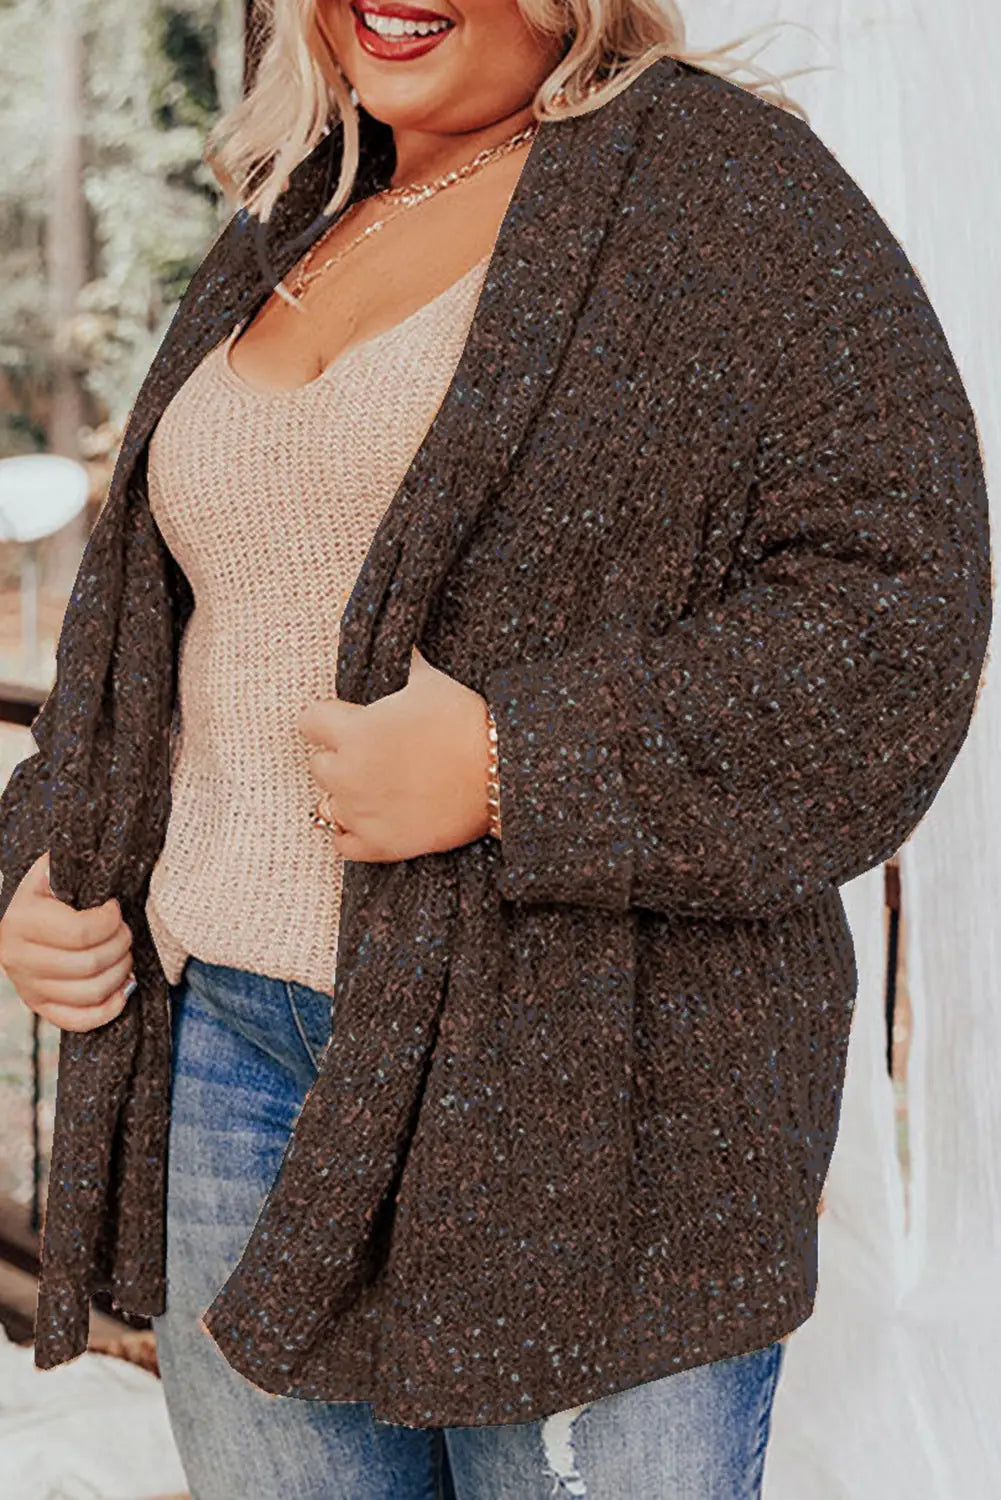 Bonbon open front knit plus size cozy cardigan - chicory coffee / 1x / 100% polyester